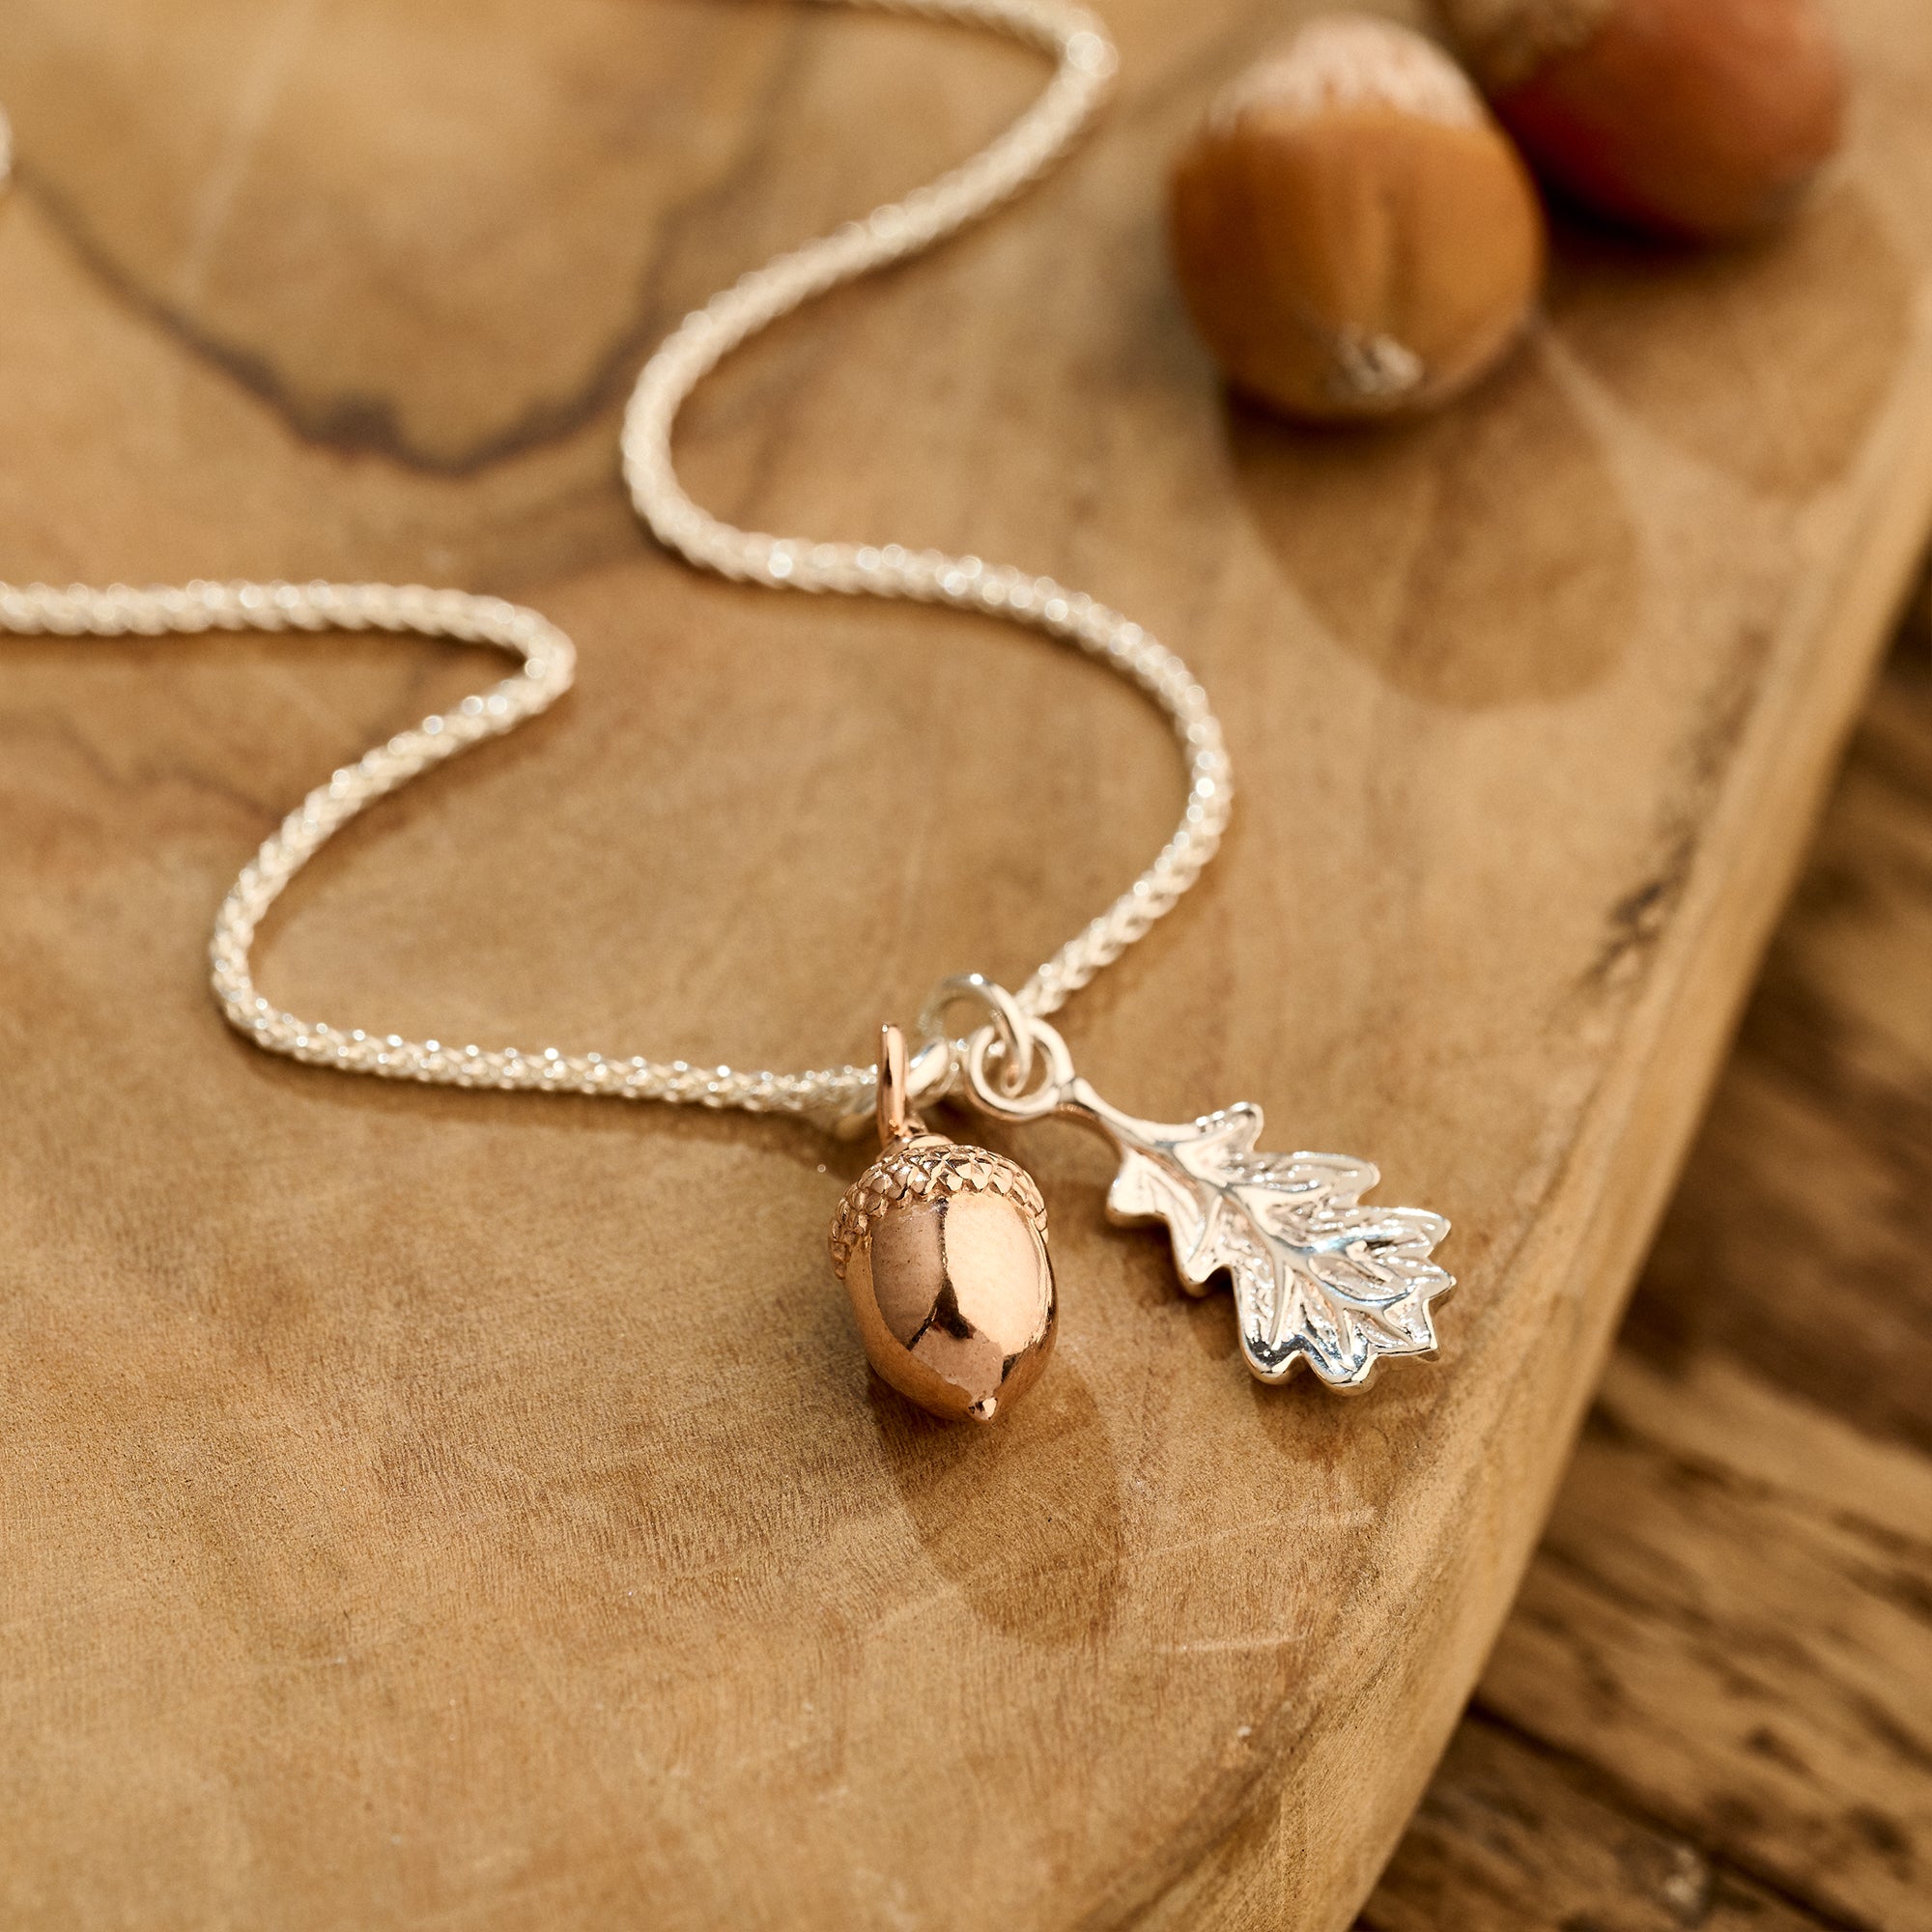 Solid Silver and Rose Gold Acorn Oak Leaf Necklace - Elegant pendant with rose gold acorn, silver oak leaf, and 1.1mm chain link. Nature-inspired luxury jewelry, crafted with precision and weighing 3.6g. Unique blend of solid silver and rose gold, a symbol of timeless beauty and craftsmanship.